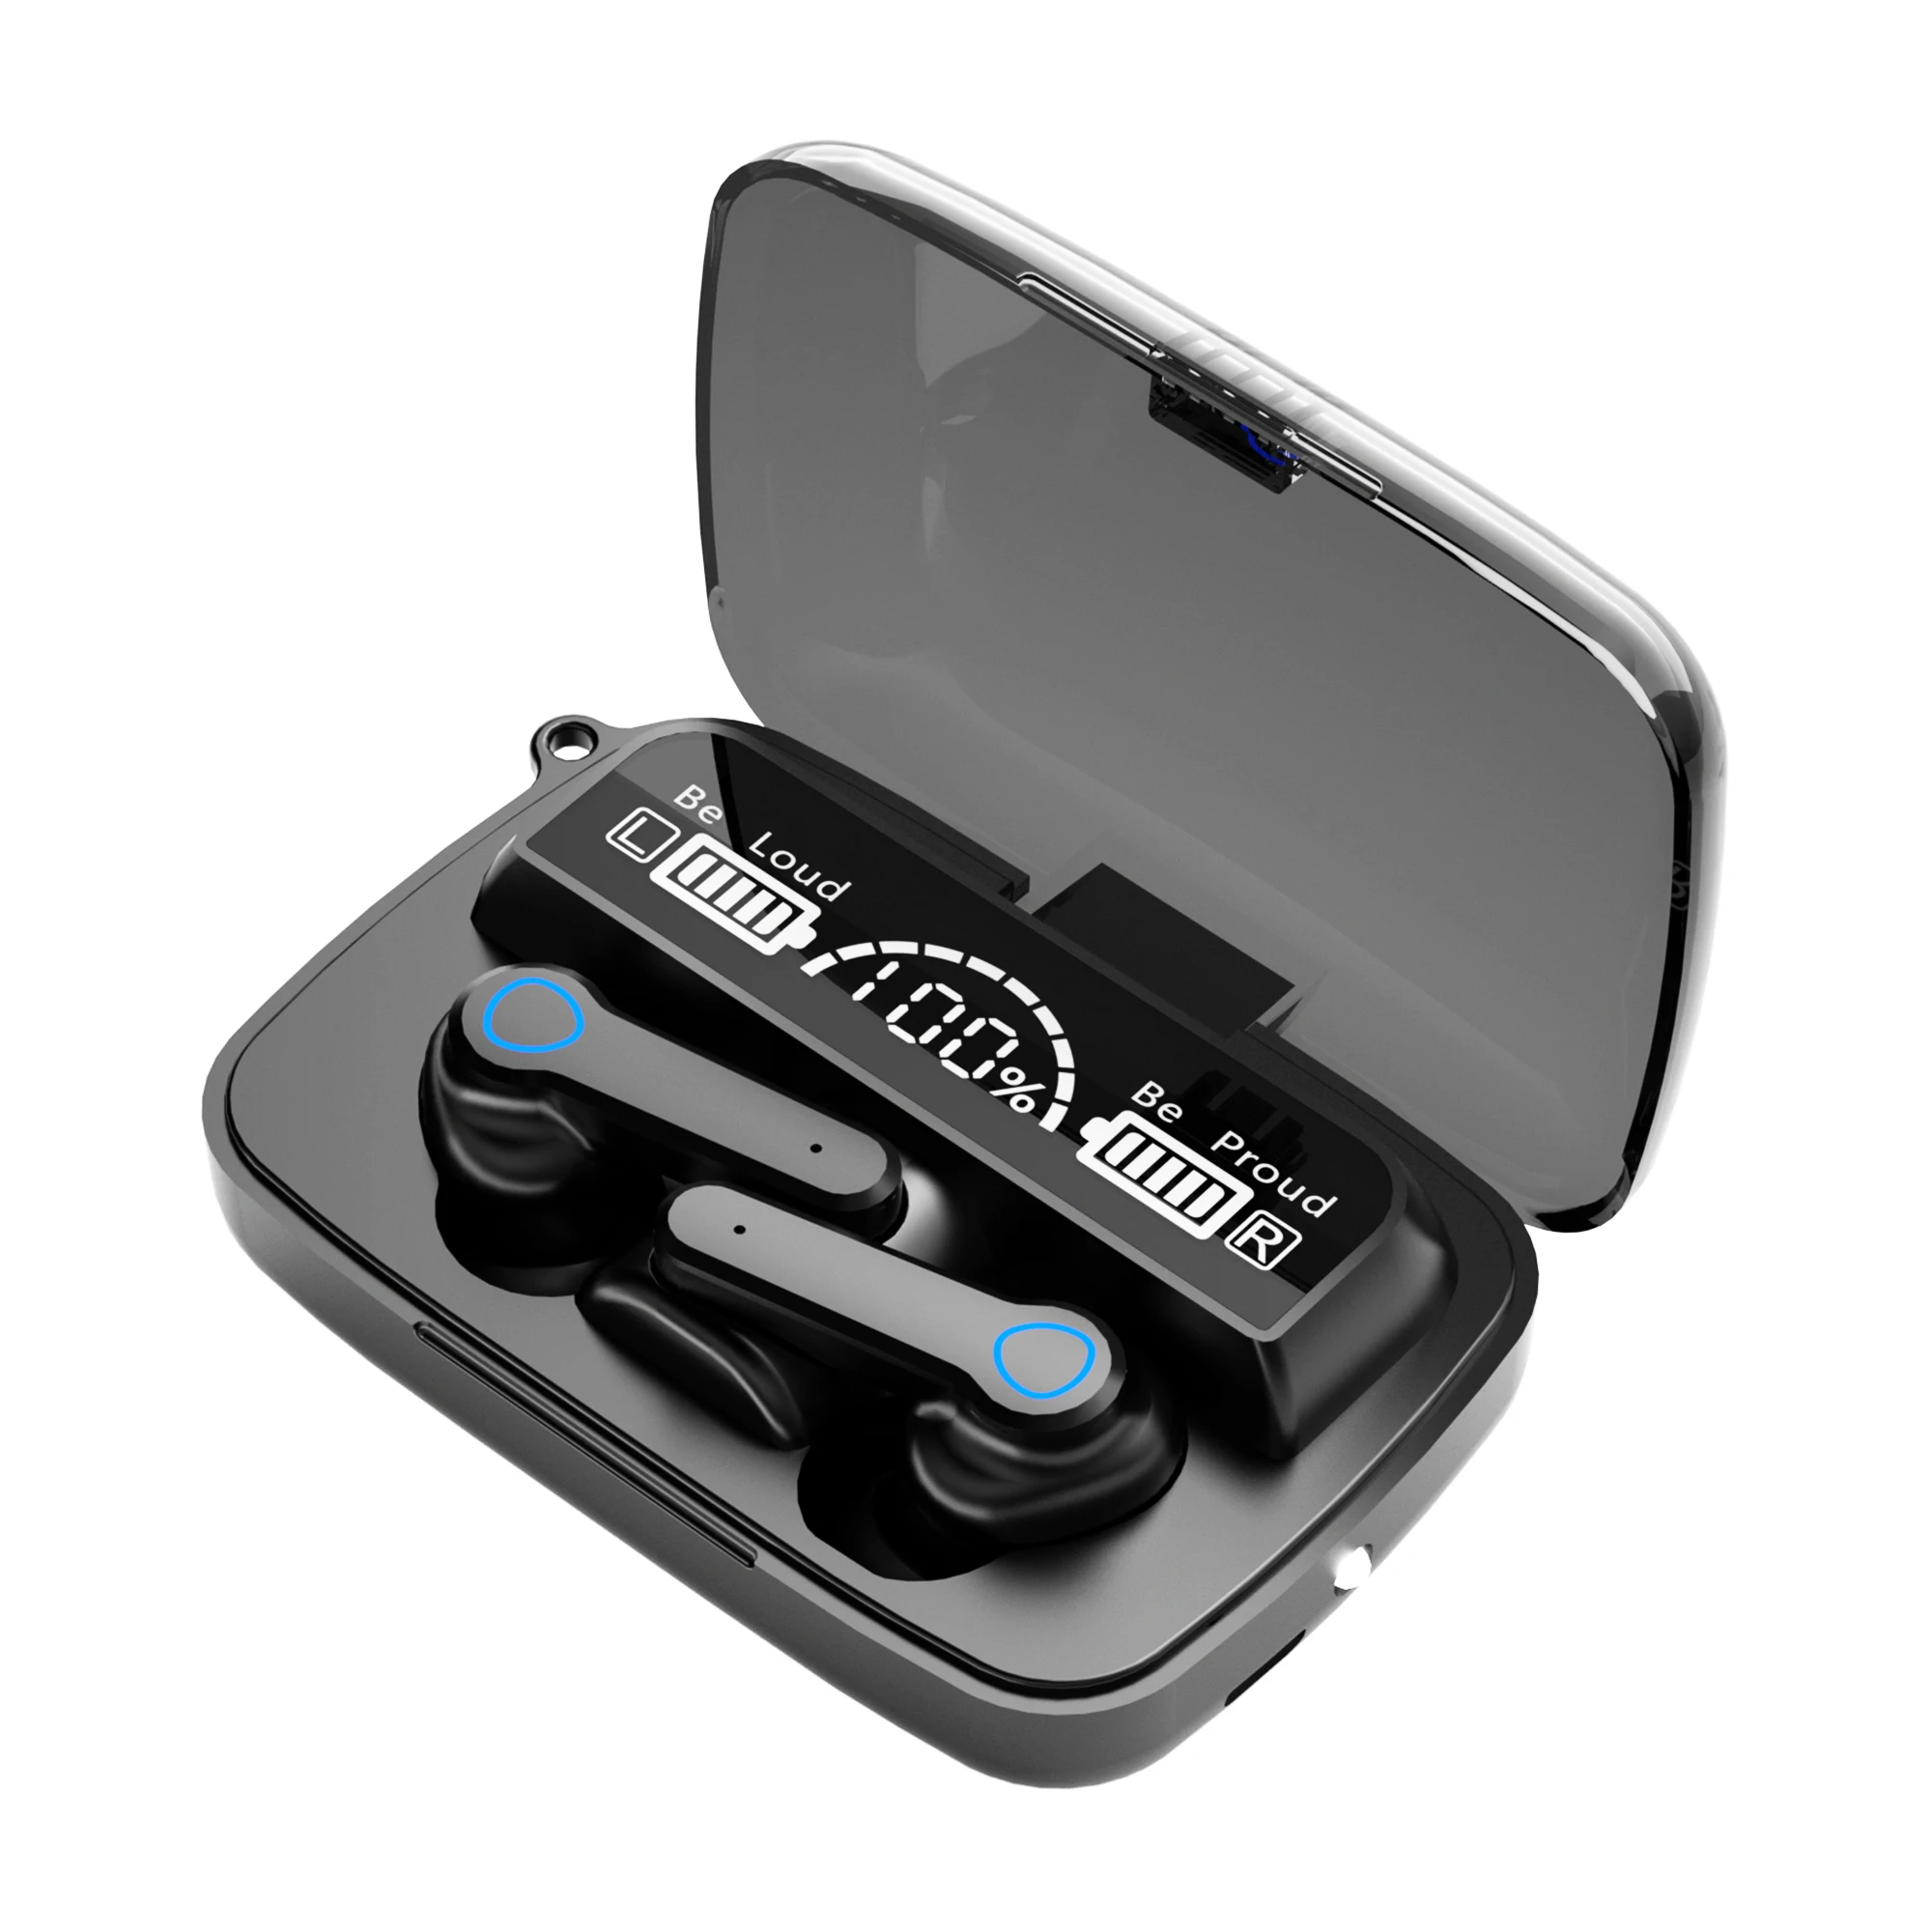 

2021 Newest version Wireless Mini TWS BT5.1 Earphone M19 Touch earphone with charging Box